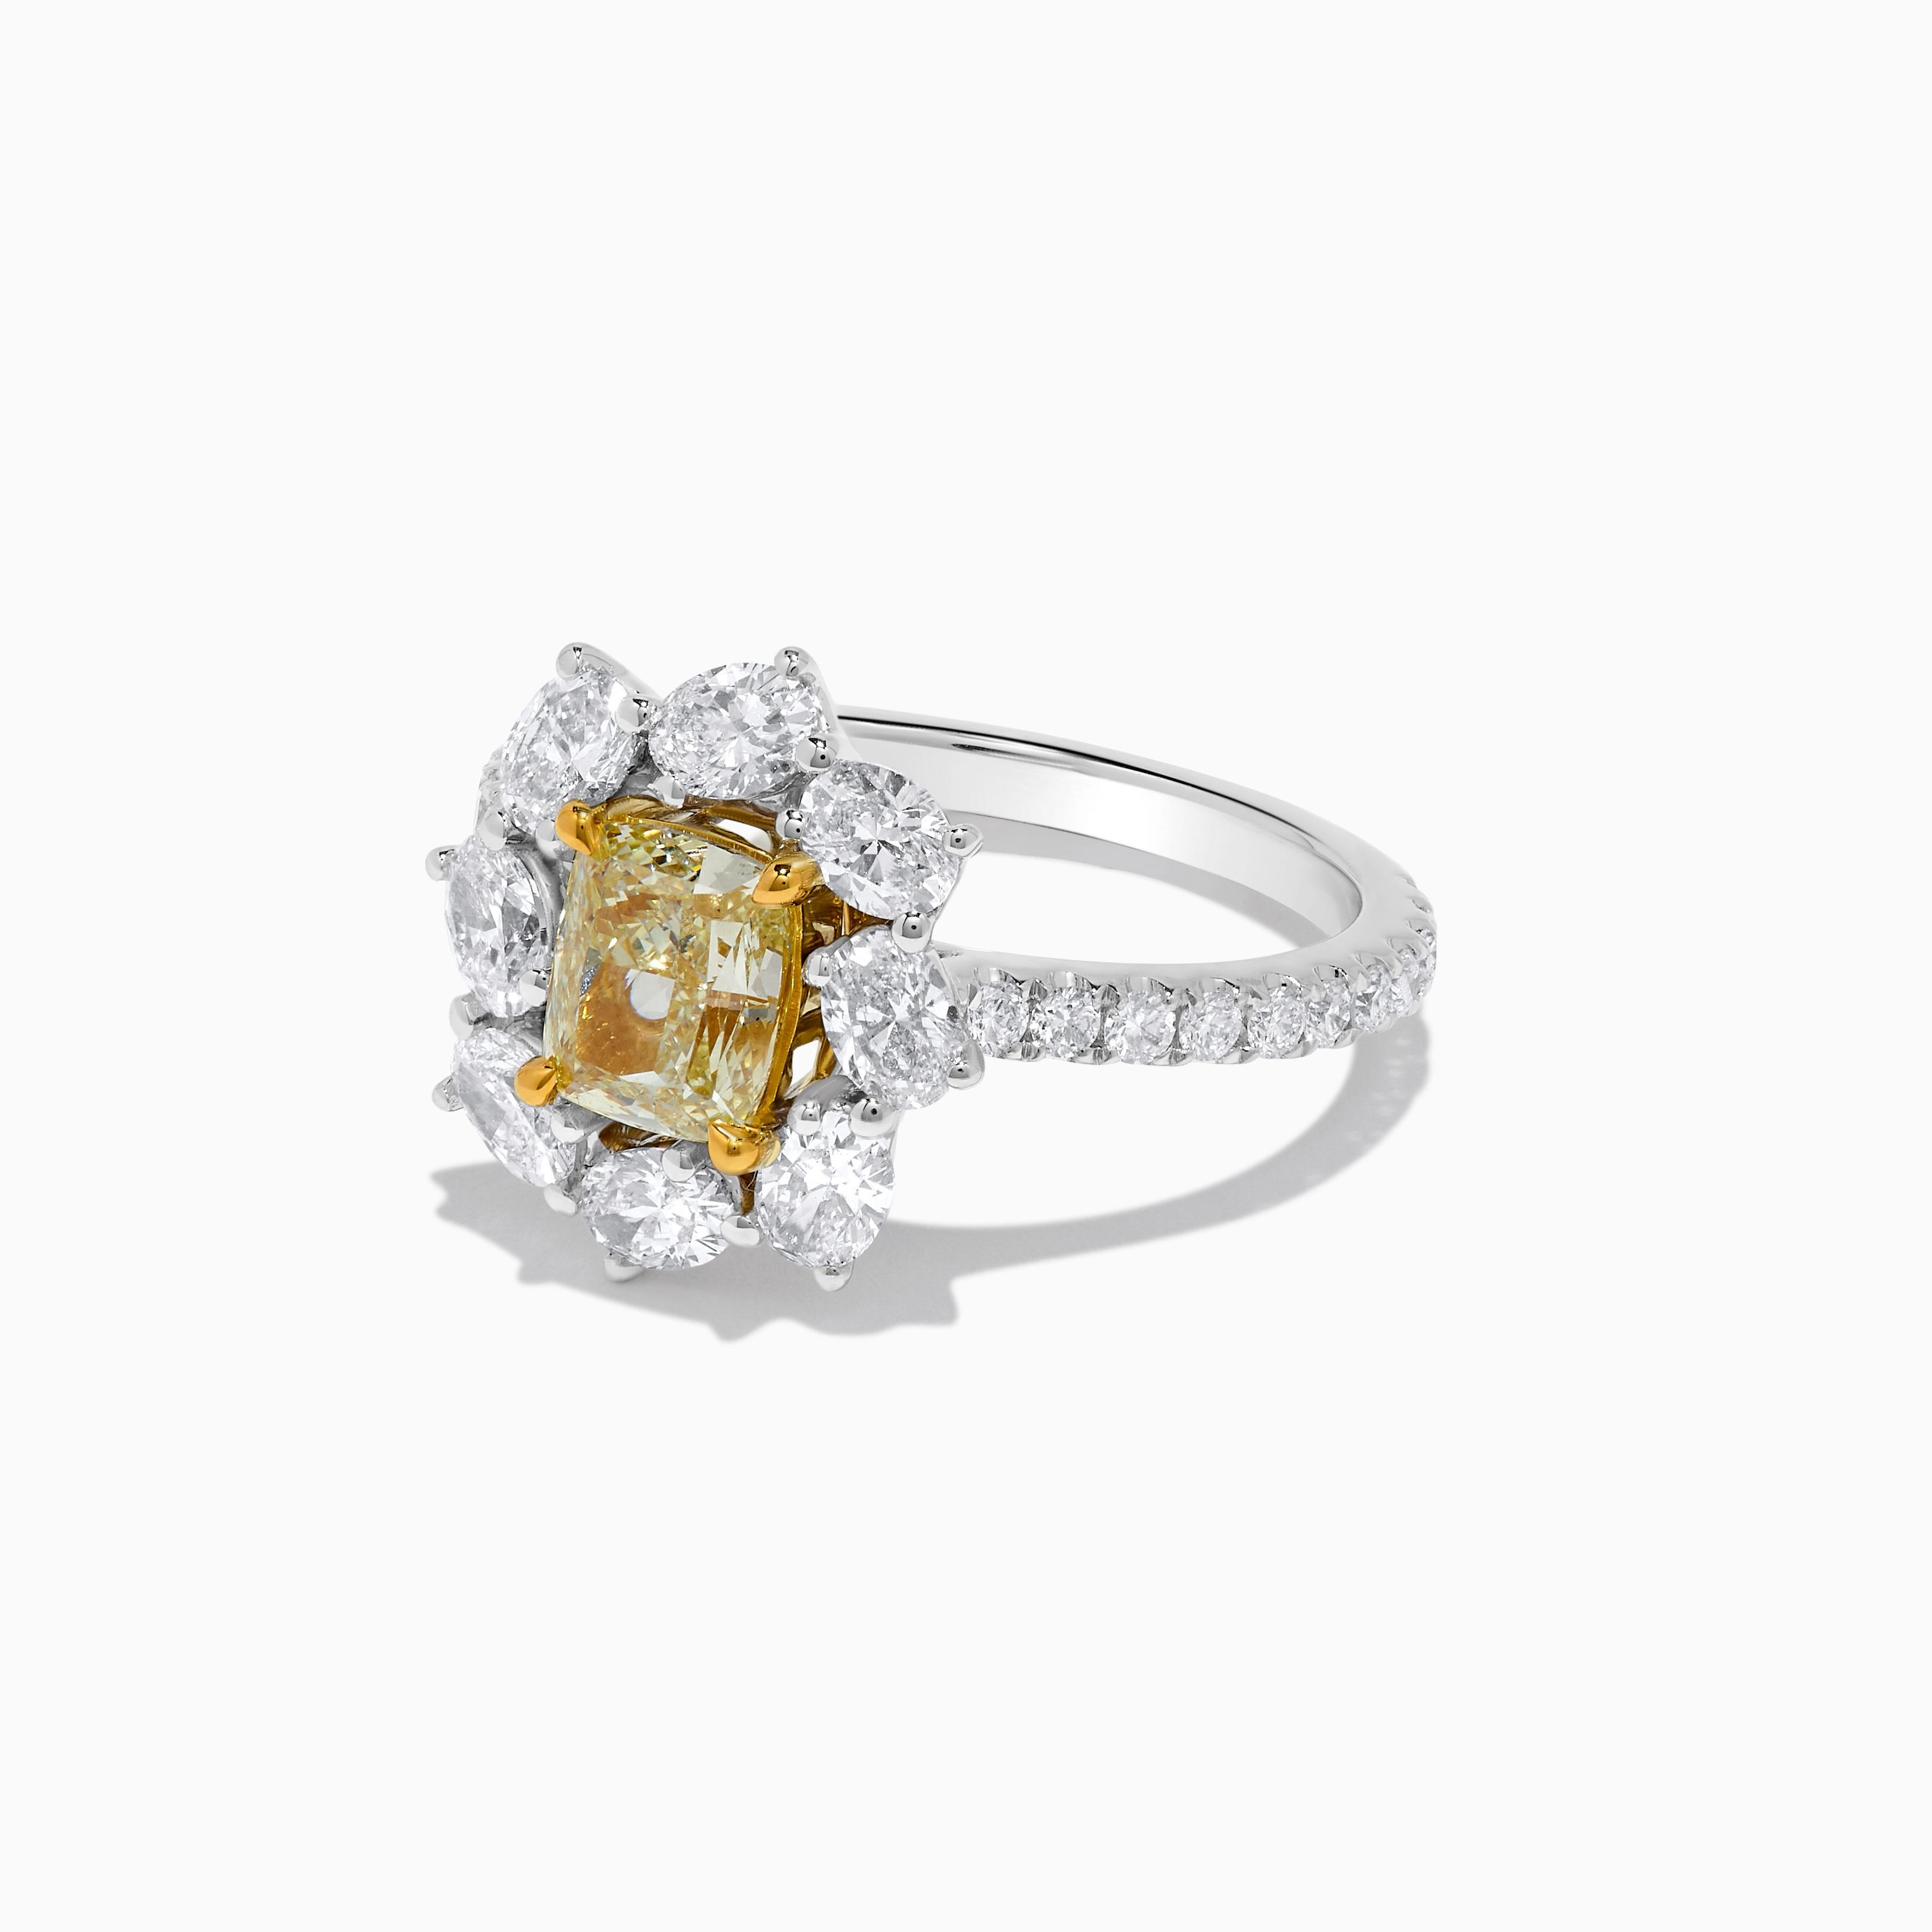 RareGemWorld's classic GIA certified diamond ring. Mounted in a beautiful 18K Yellow and White Gold setting with a natural cushion cut yellow diamond. The yellow diamond is surrounded by natural oval cut white diamonds and round natural white